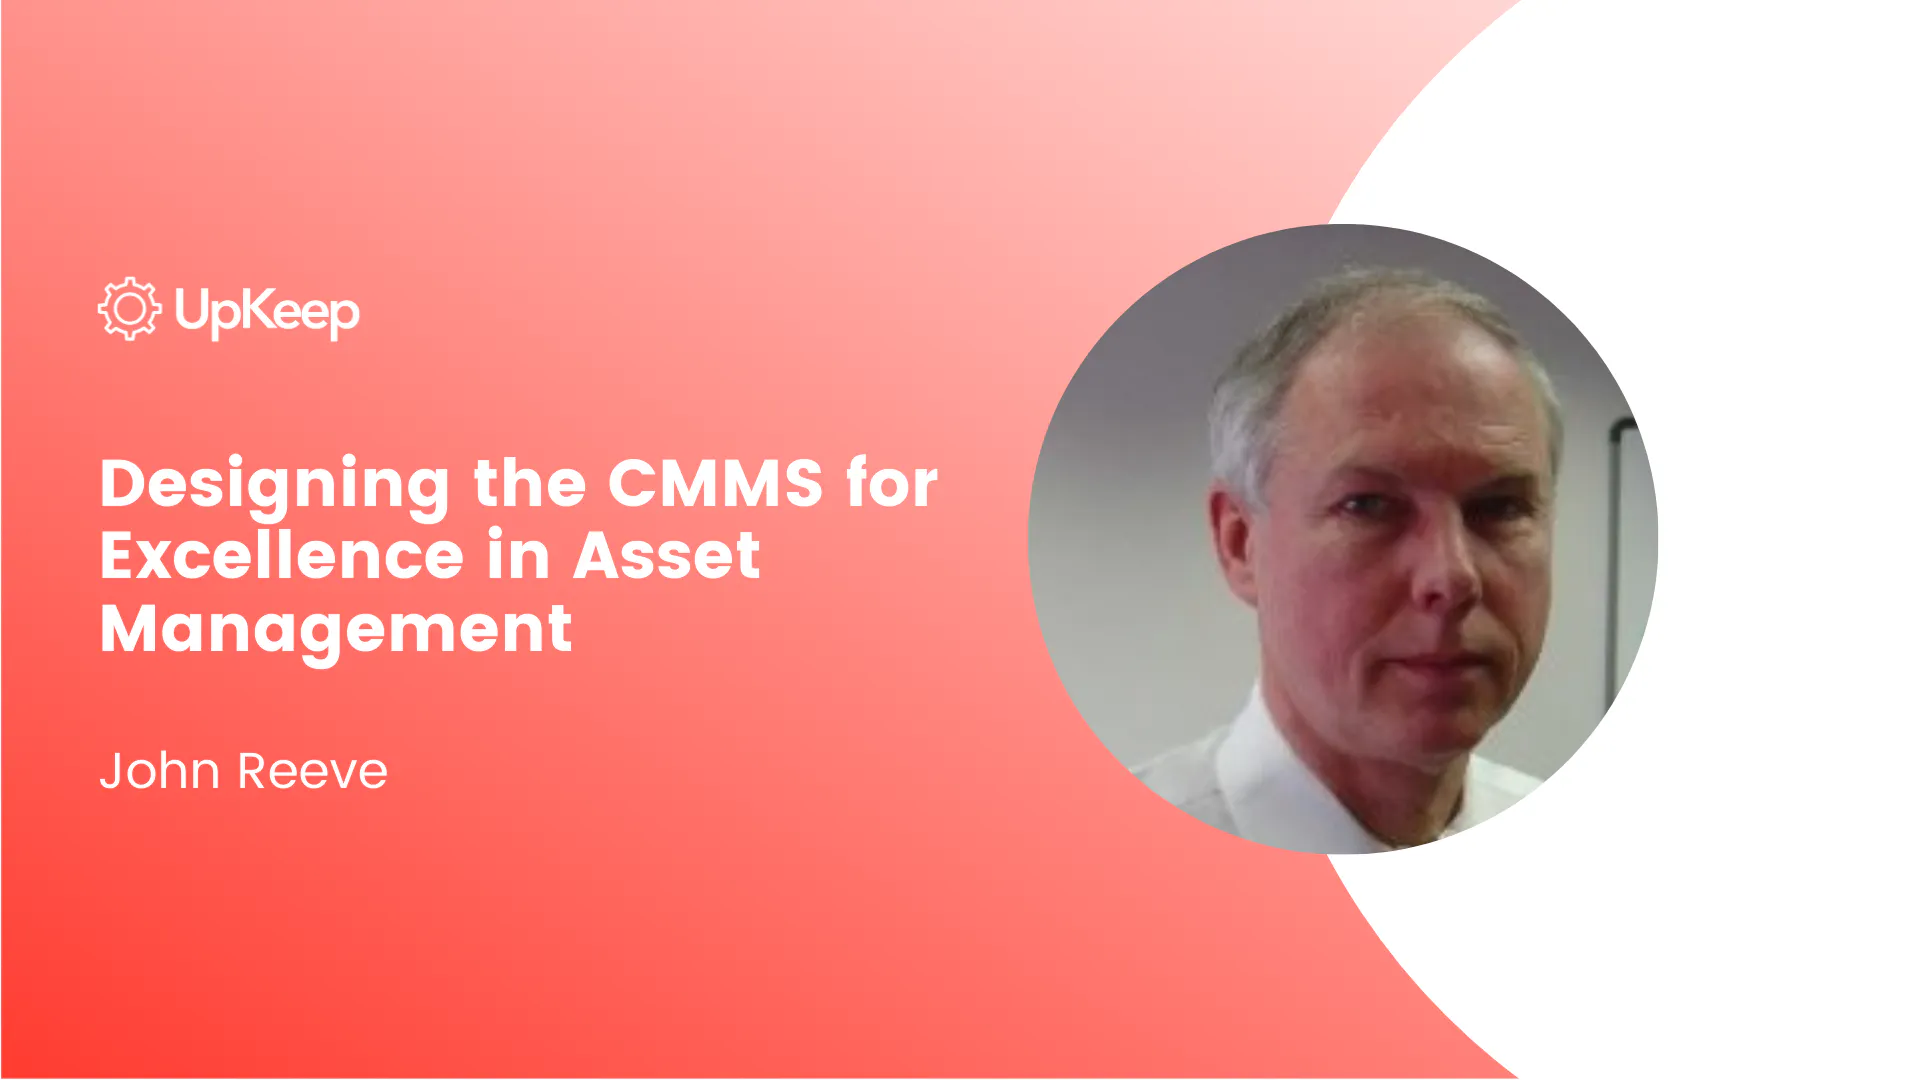 Designing the CMMS for Excellence in Asset Management